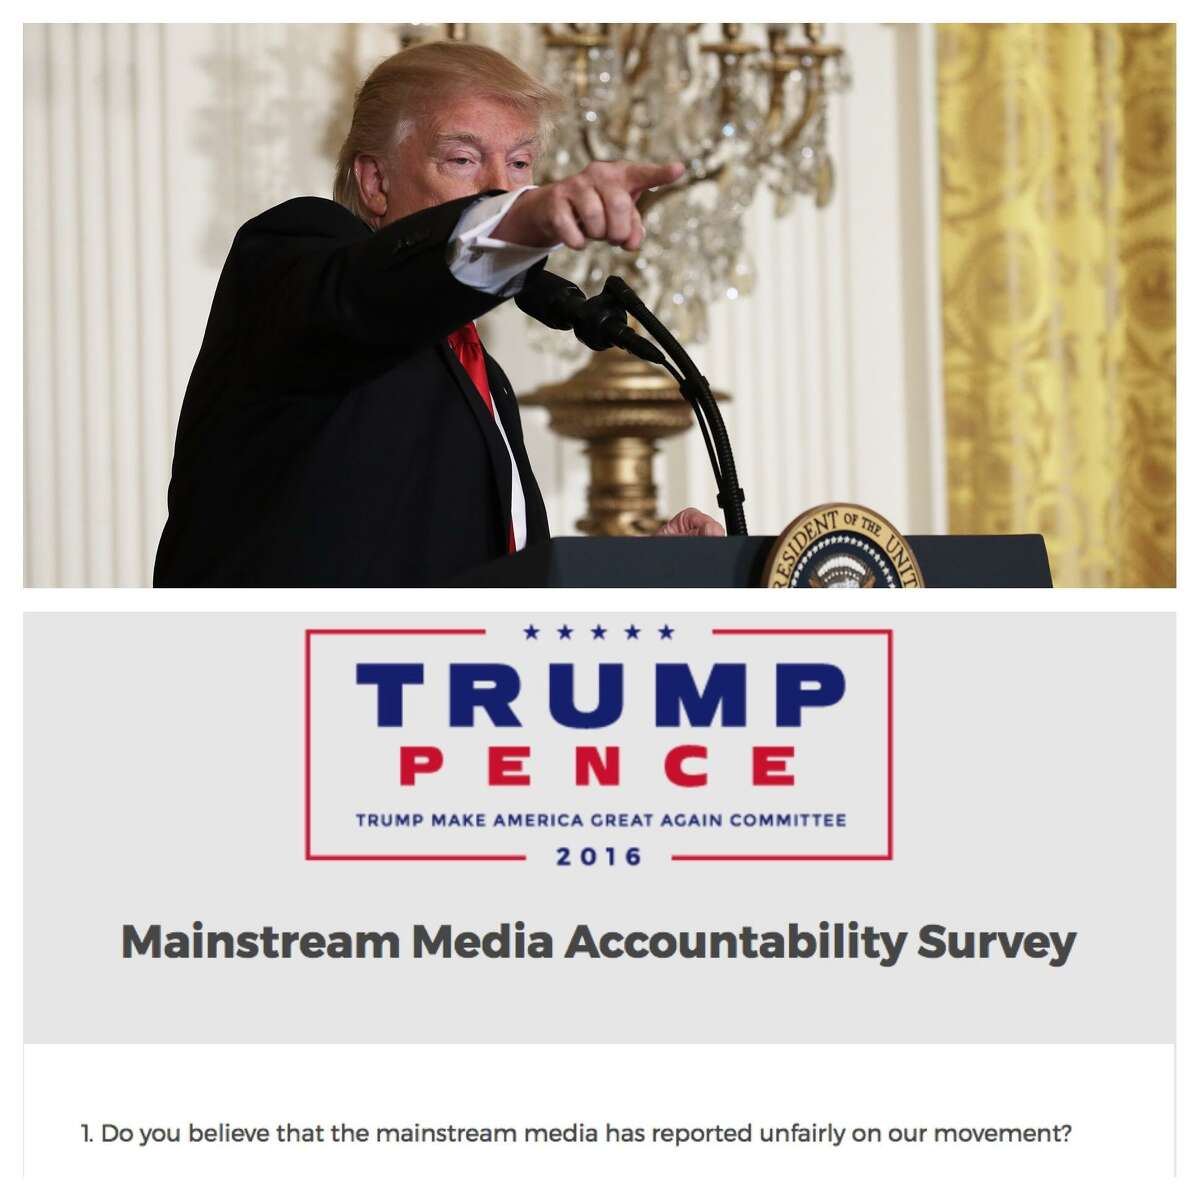 Minutes after President Trump concluded his press conference Thursday, his fundraising committee sent out a ‘mainstream media accountability survey.’ Click ahead to read some questions from that survey.